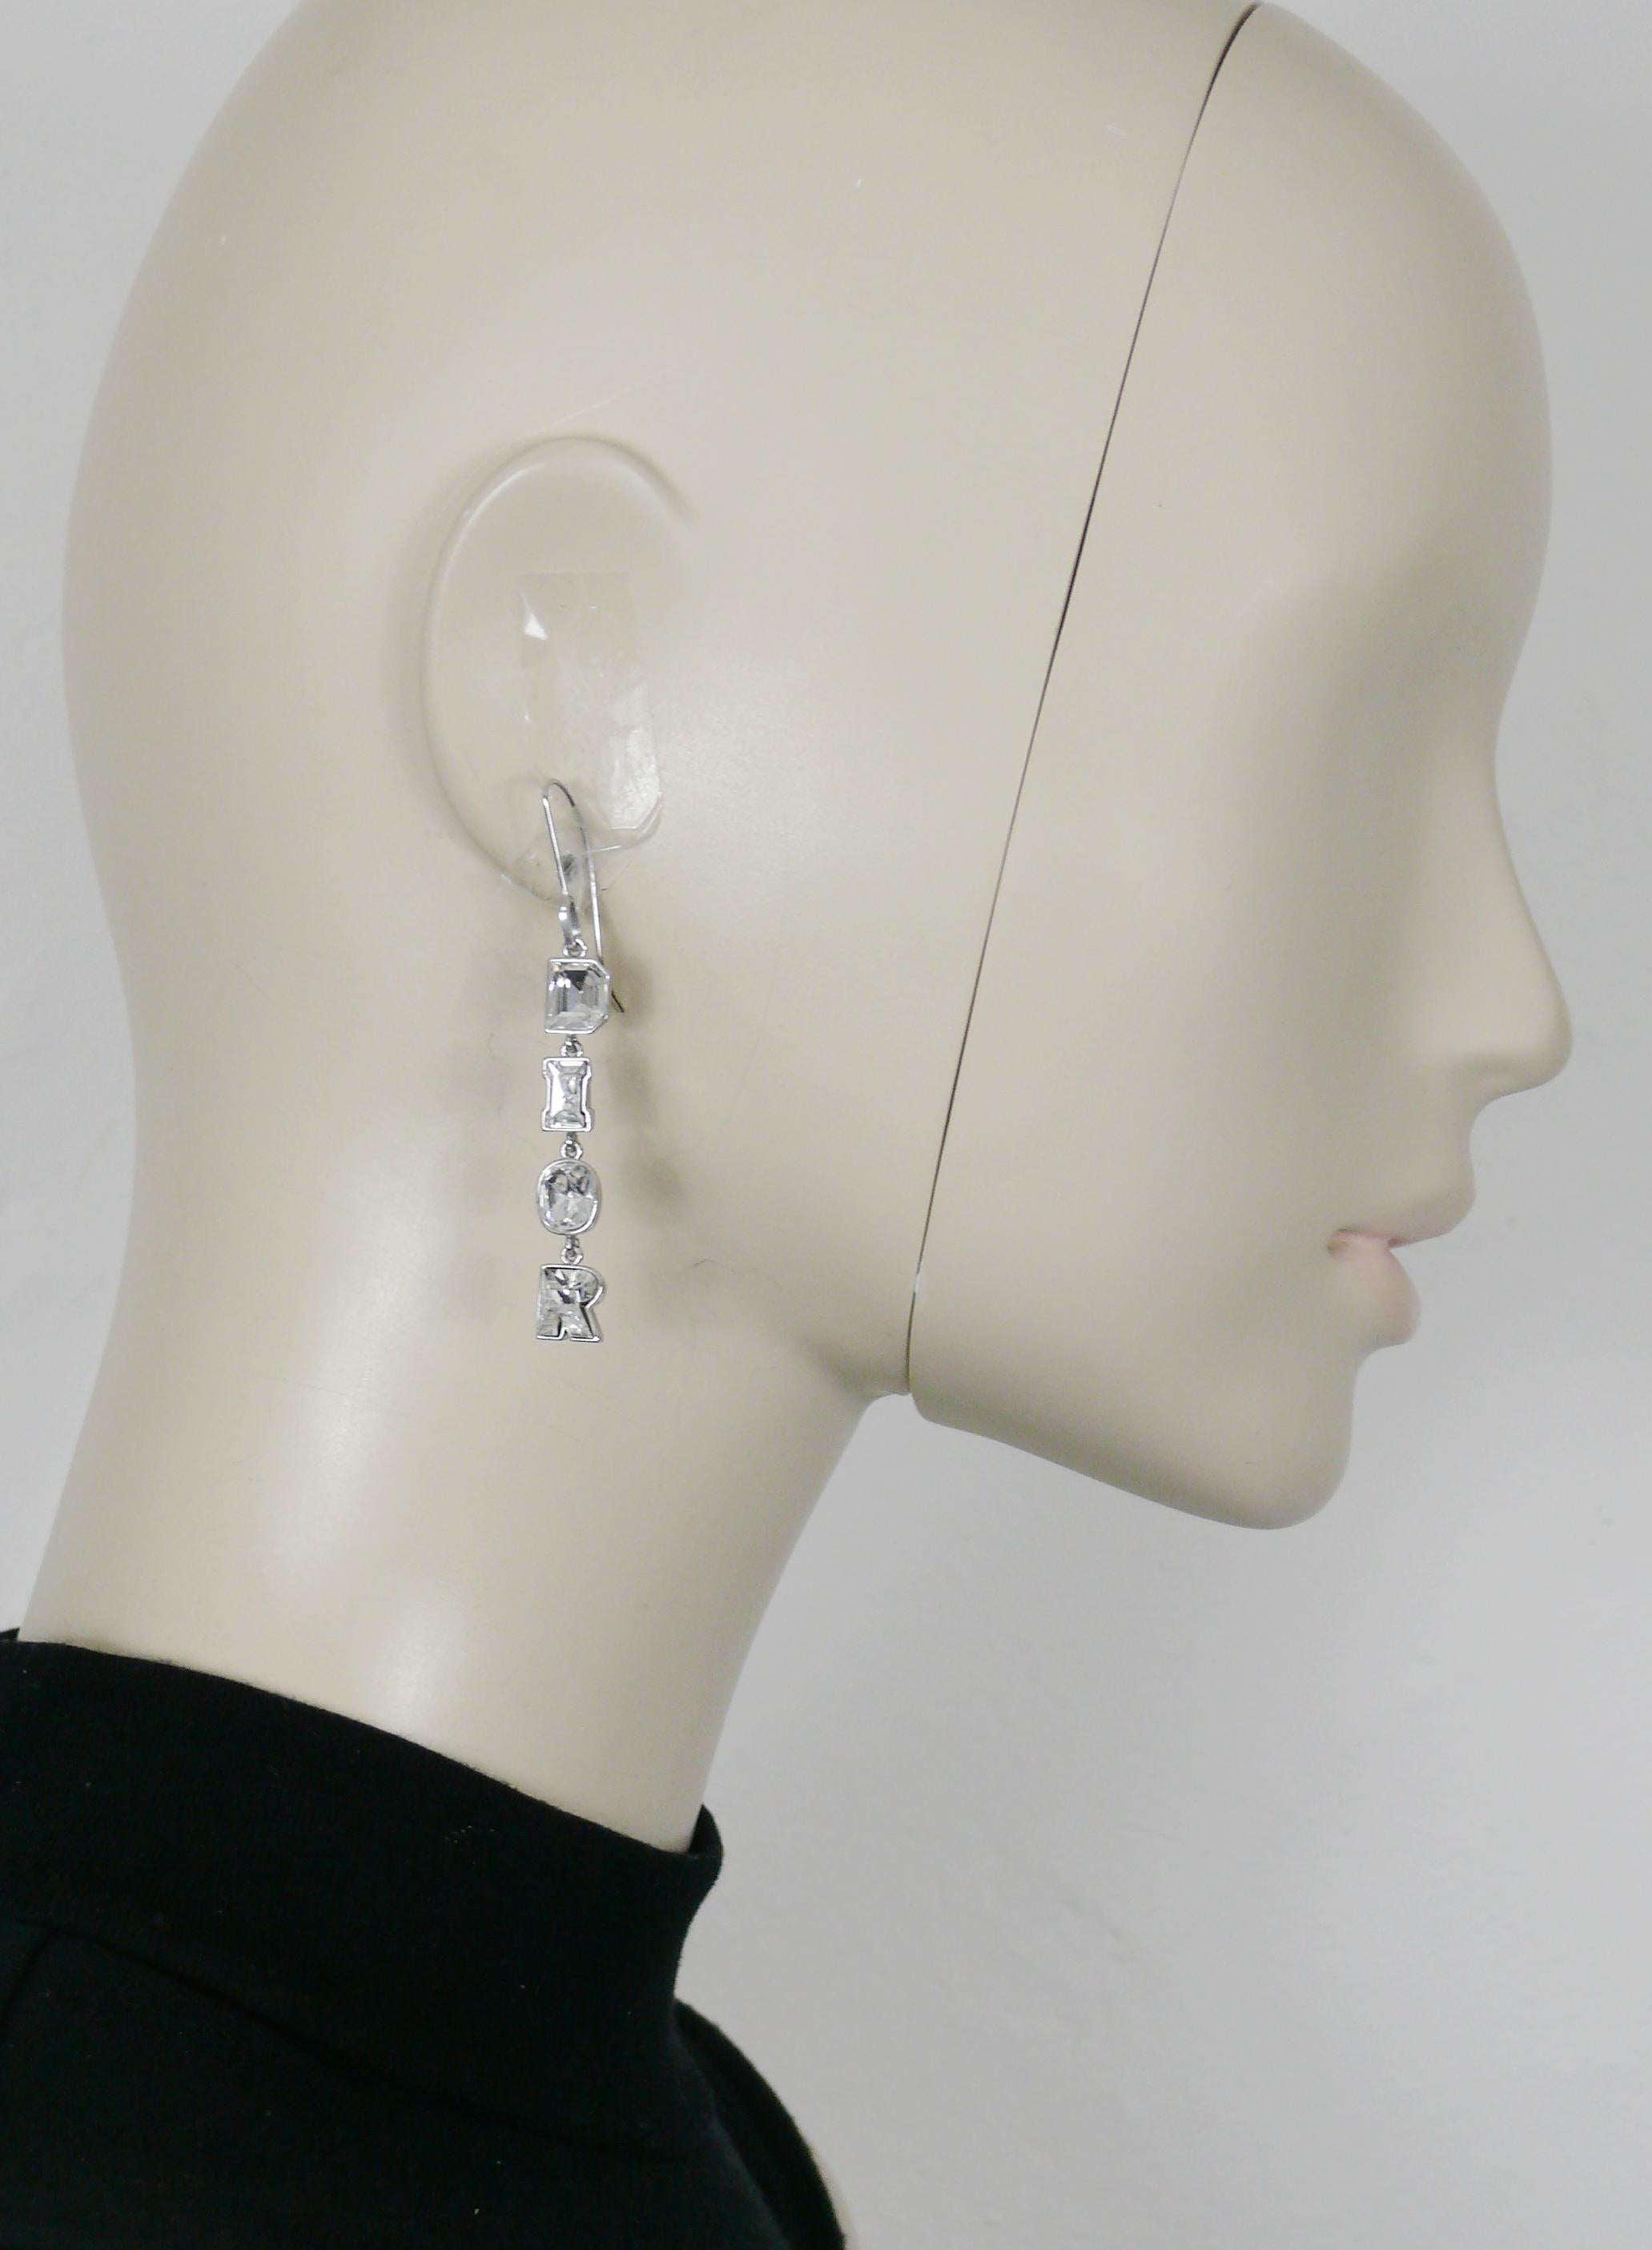 CHRISTIAN DIOR vintage silver tone dangling earrings (for pierced ears) featuring a clear crystal D I O R logo.

Unmarked (usual for this model).

Indicative measurements : height approx. 6.3 cm (2.48 inches) / max. width approx. 0.7 cm (0.28